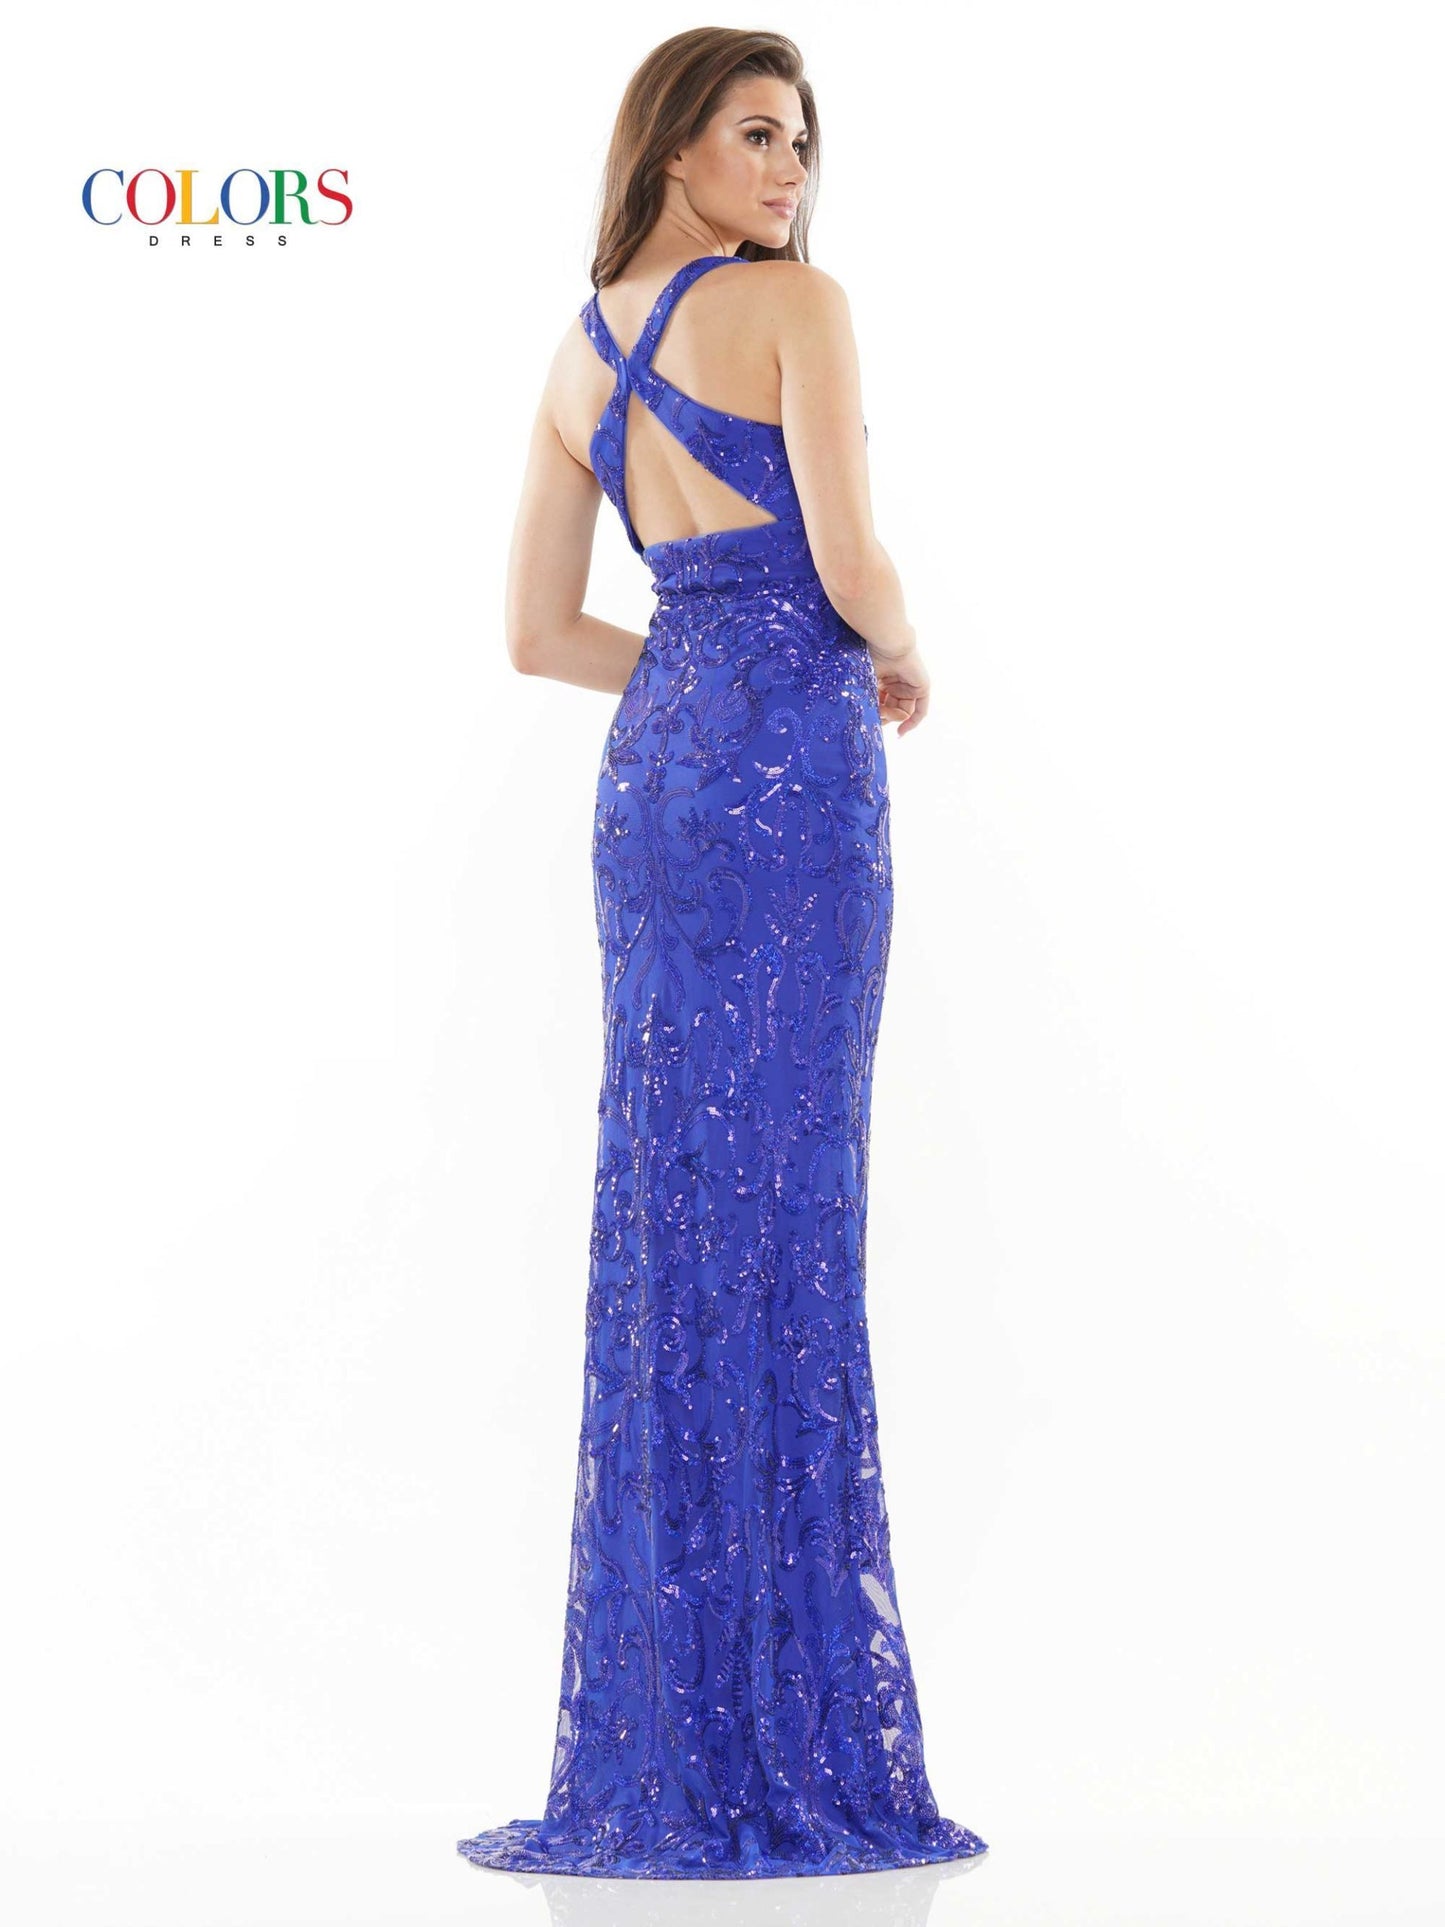 Colors 2520 Long Fitted Sequin Prom Dress Open Back Pageant Gown V Neckline 47″ Patterned sequin jersey dress with V neck, fitted skirt and cross back detail  Available Sizes: 2-24  Available Colors: Wine, Royal, Off White, Black